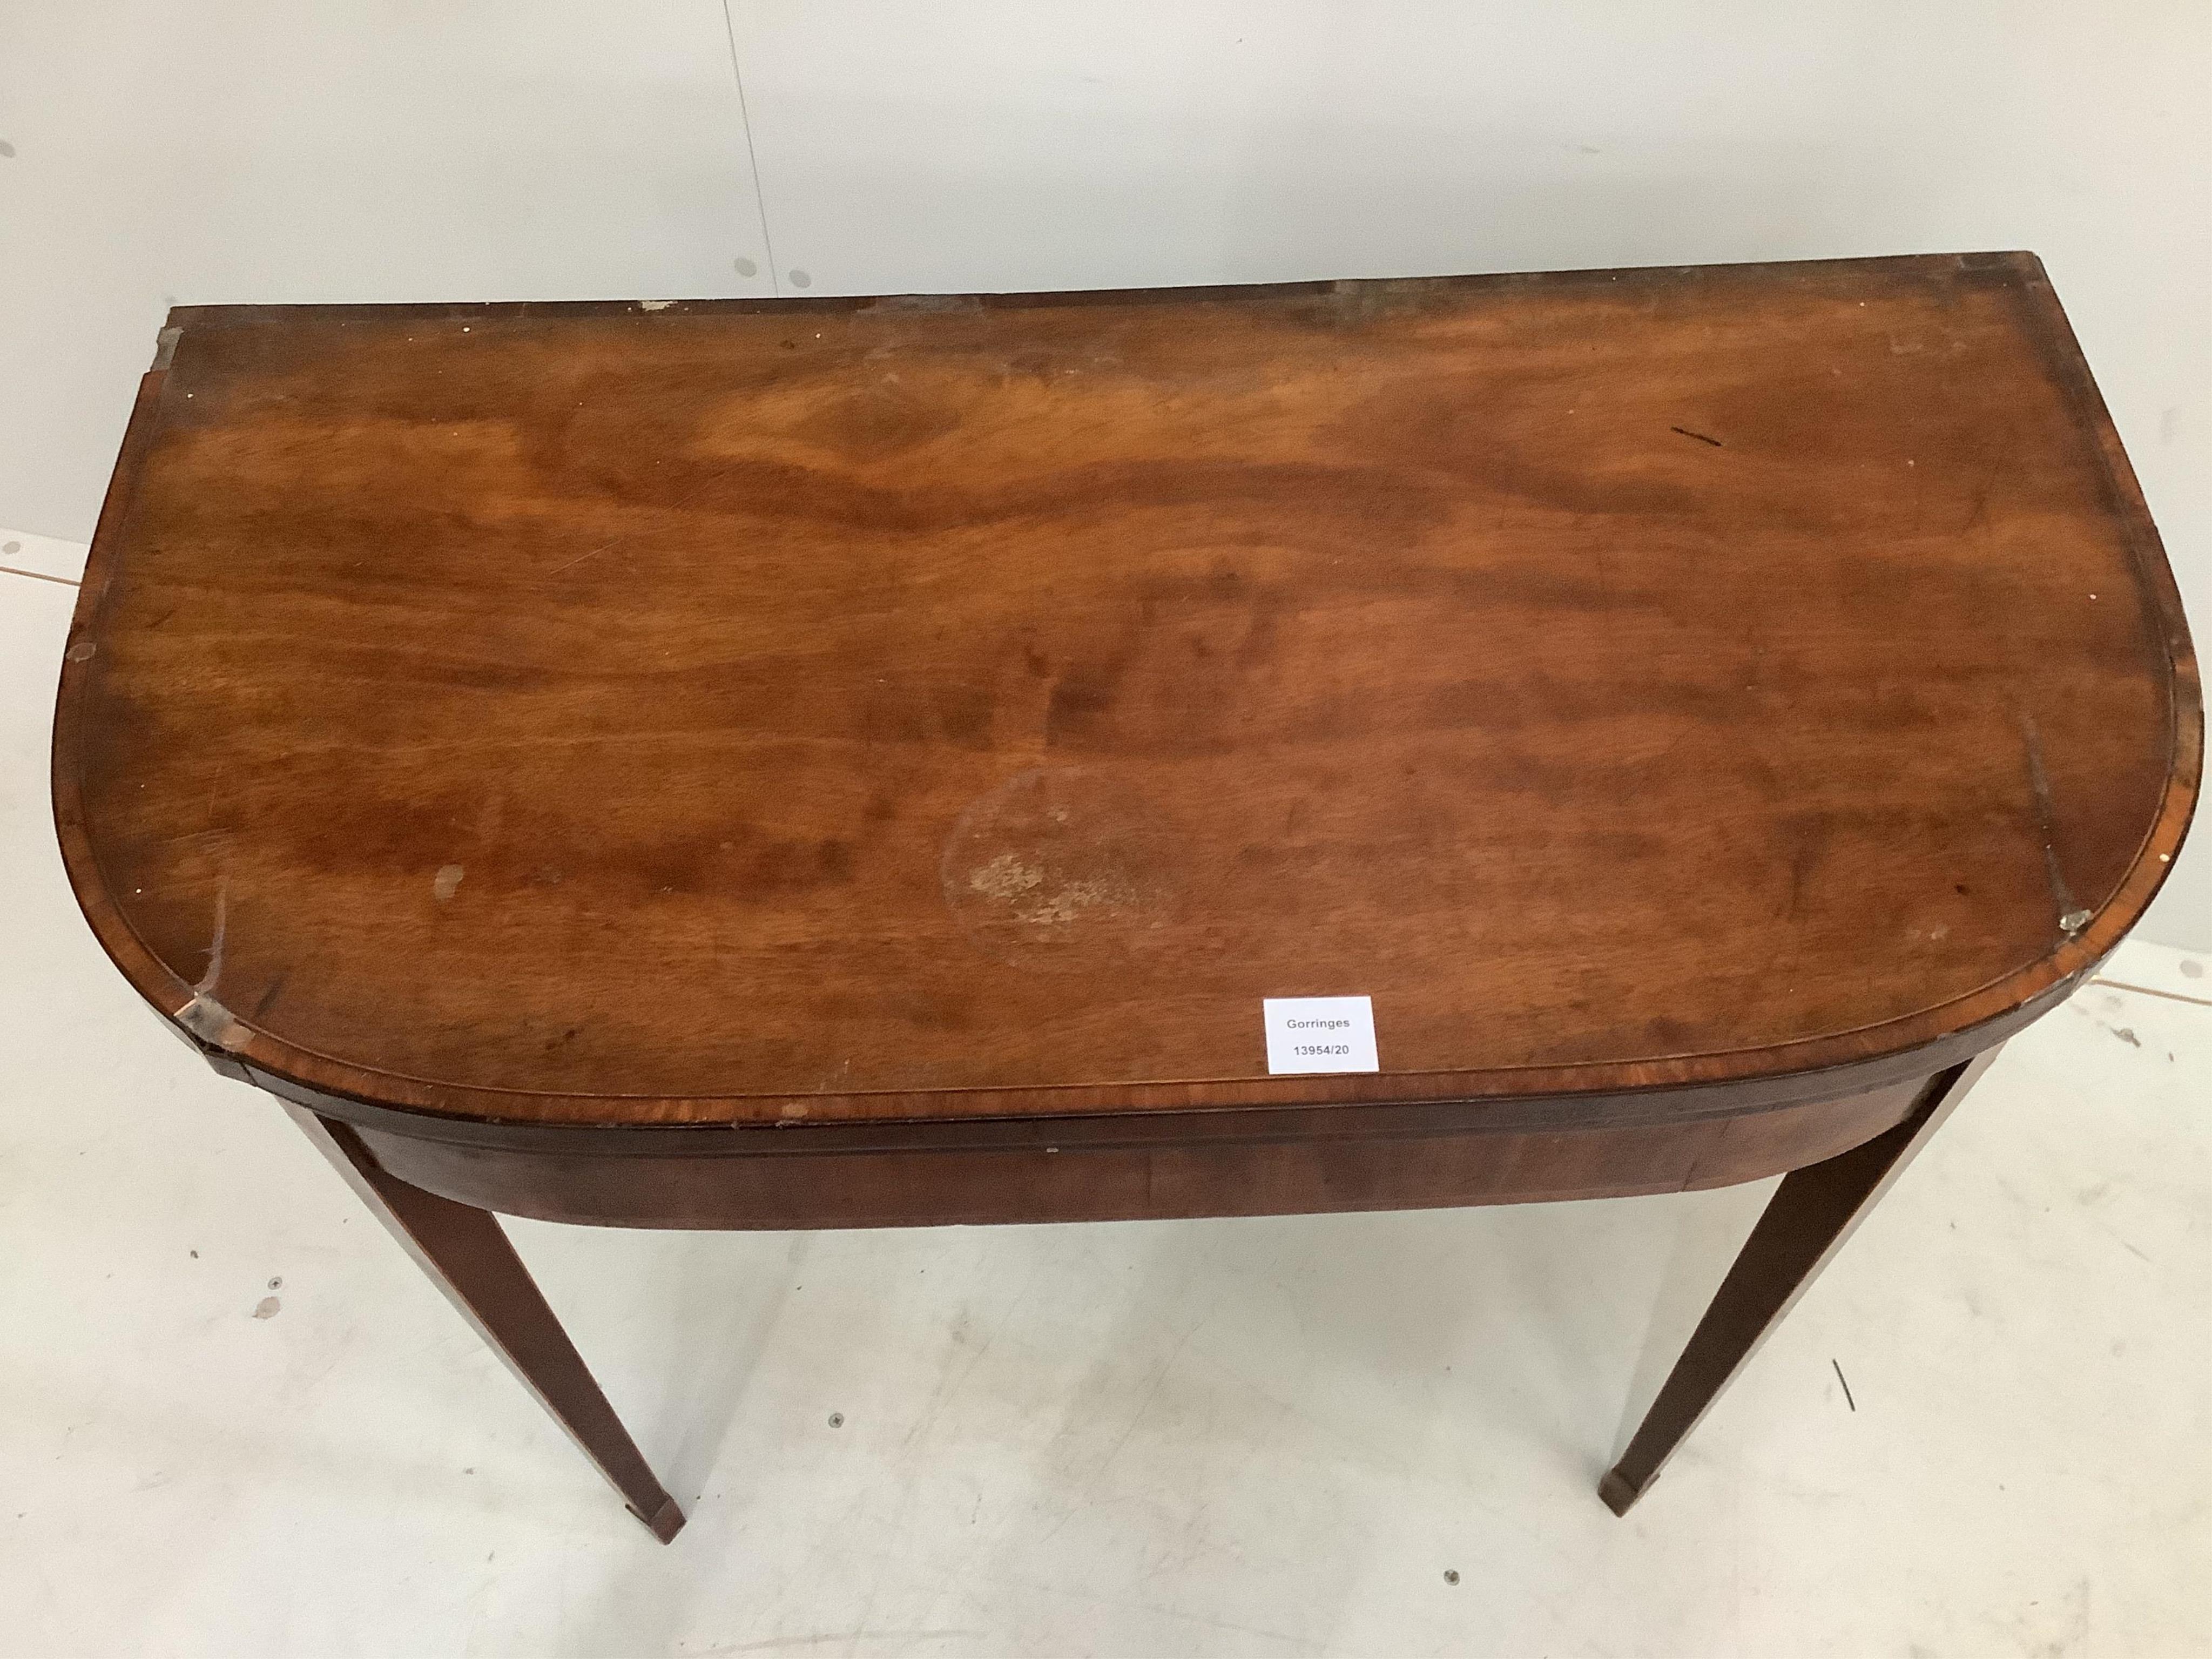 A George III satinwood banded mahogany D shaped folding card table, width 92cm, depth 45cm, height 74cm